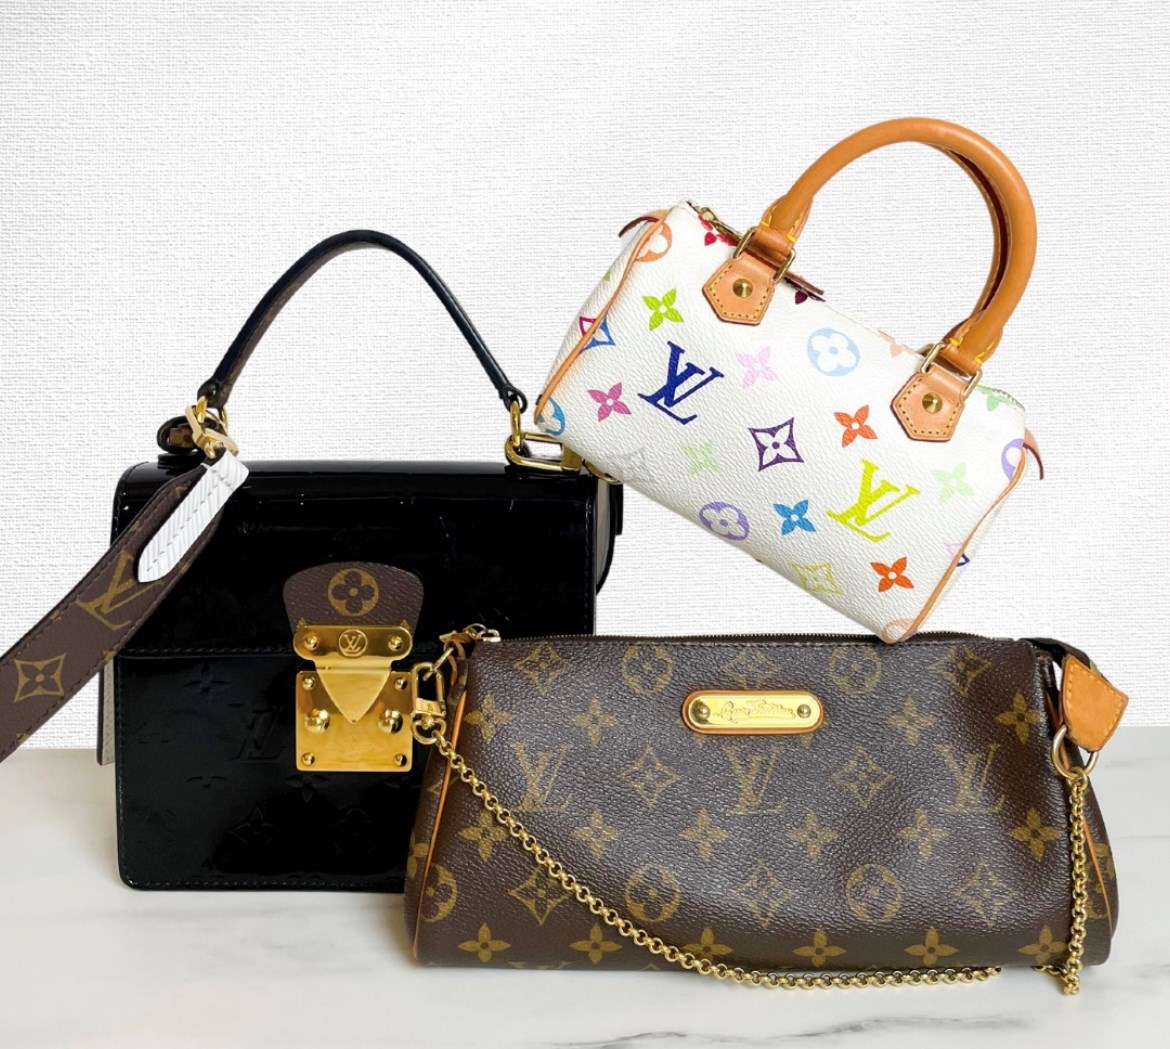 Difference between genuine and fake luxury products - Louis Vuitton stitches